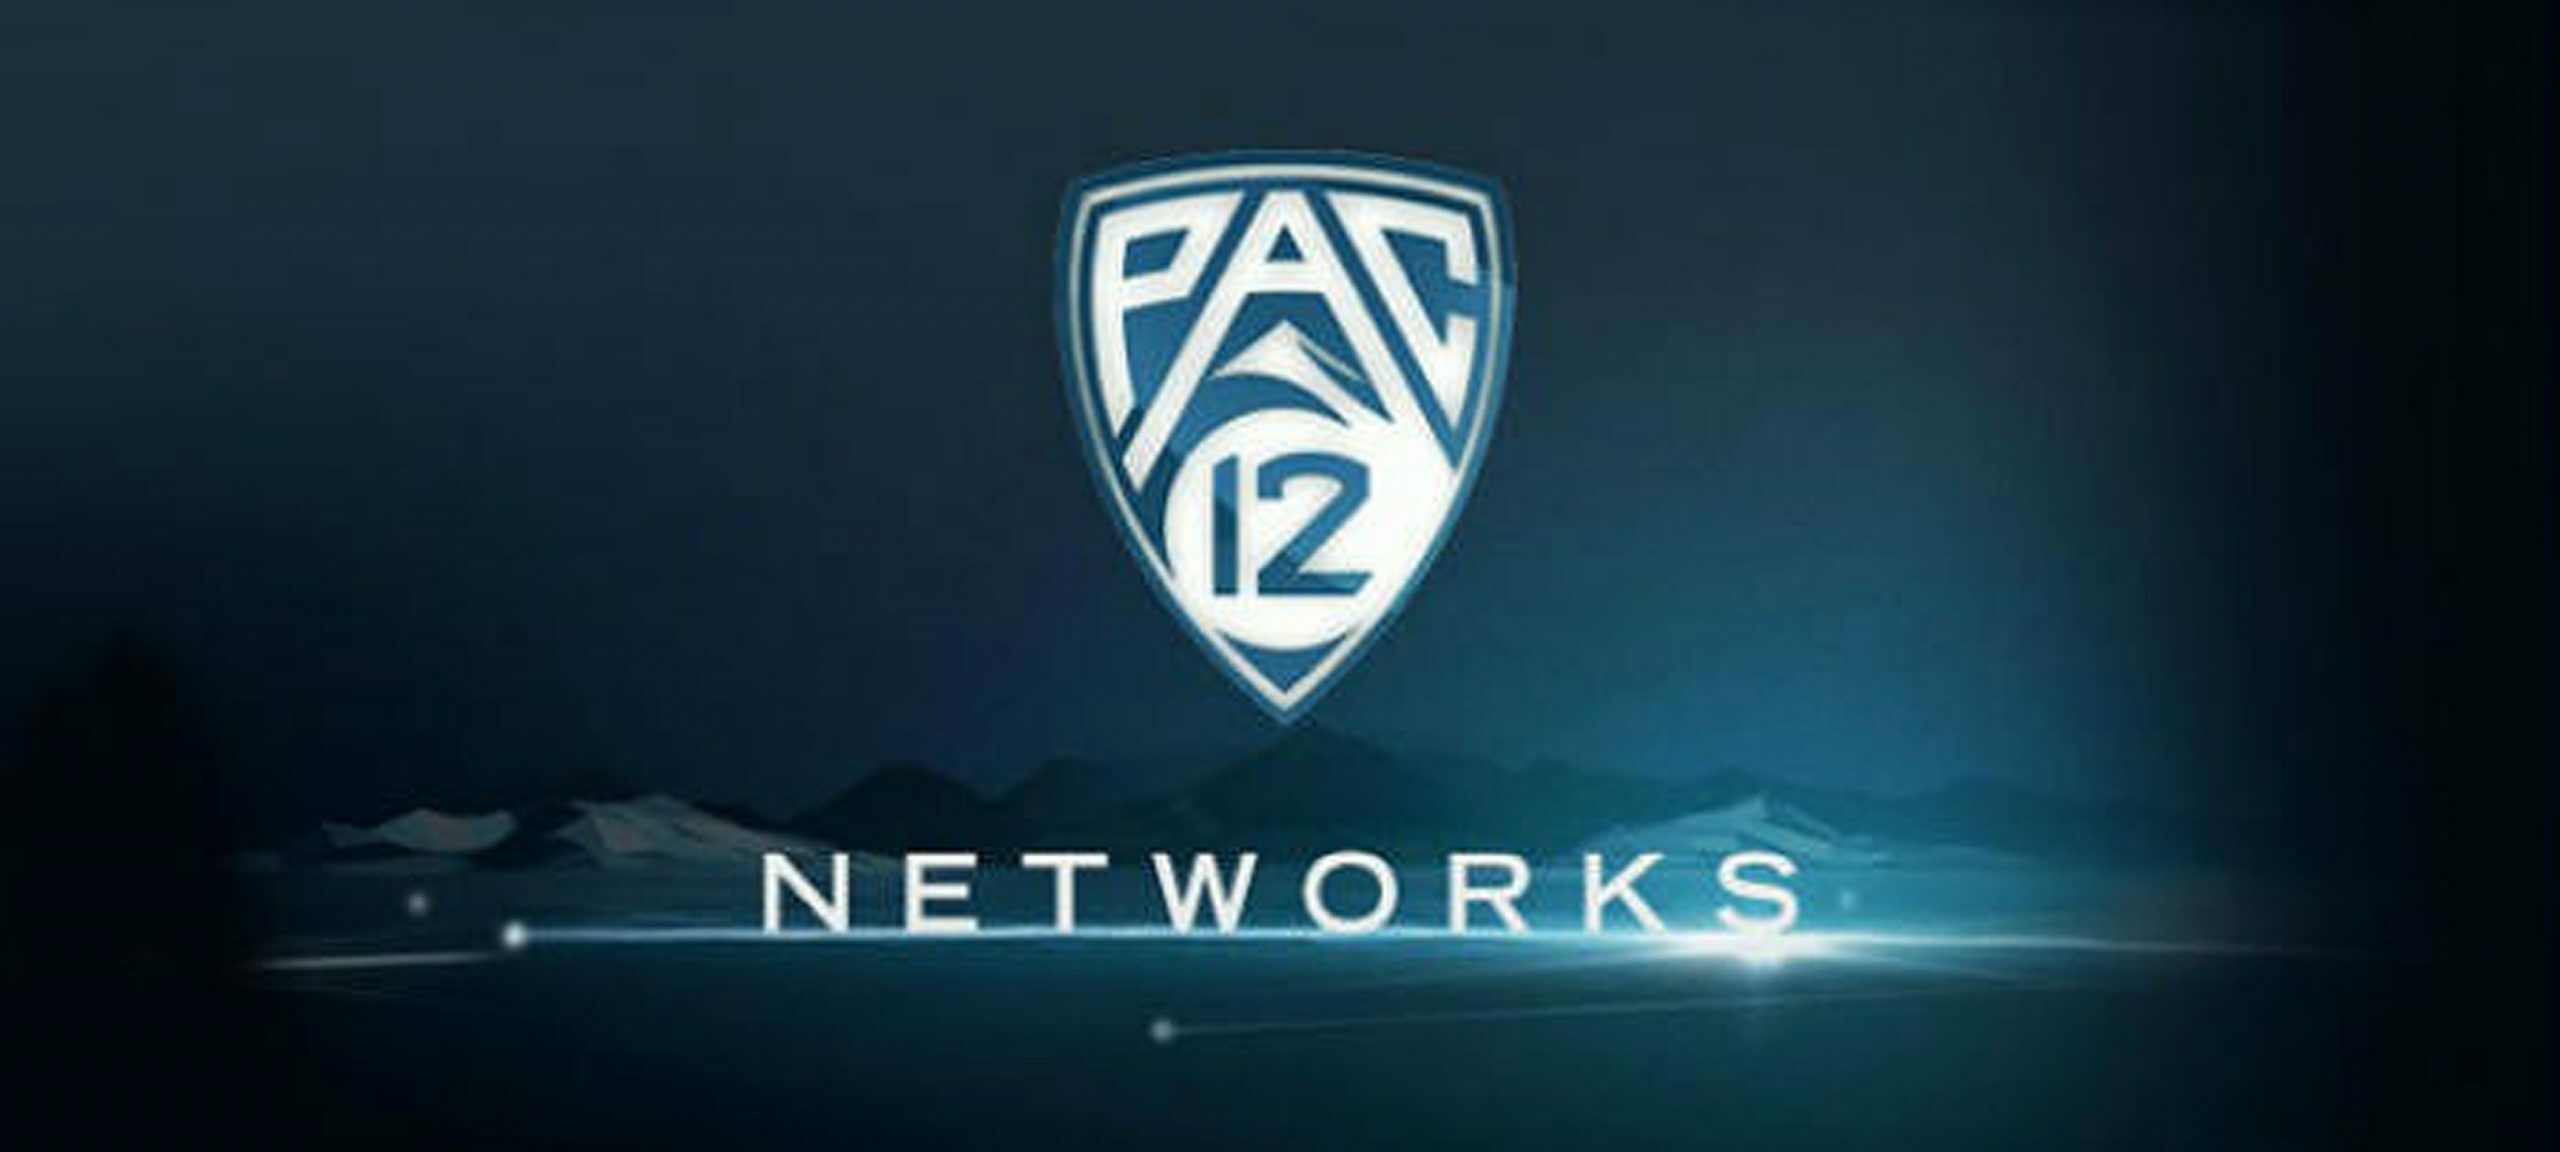 The Pac-12 Network May Become a Streaming-Only Service This Year